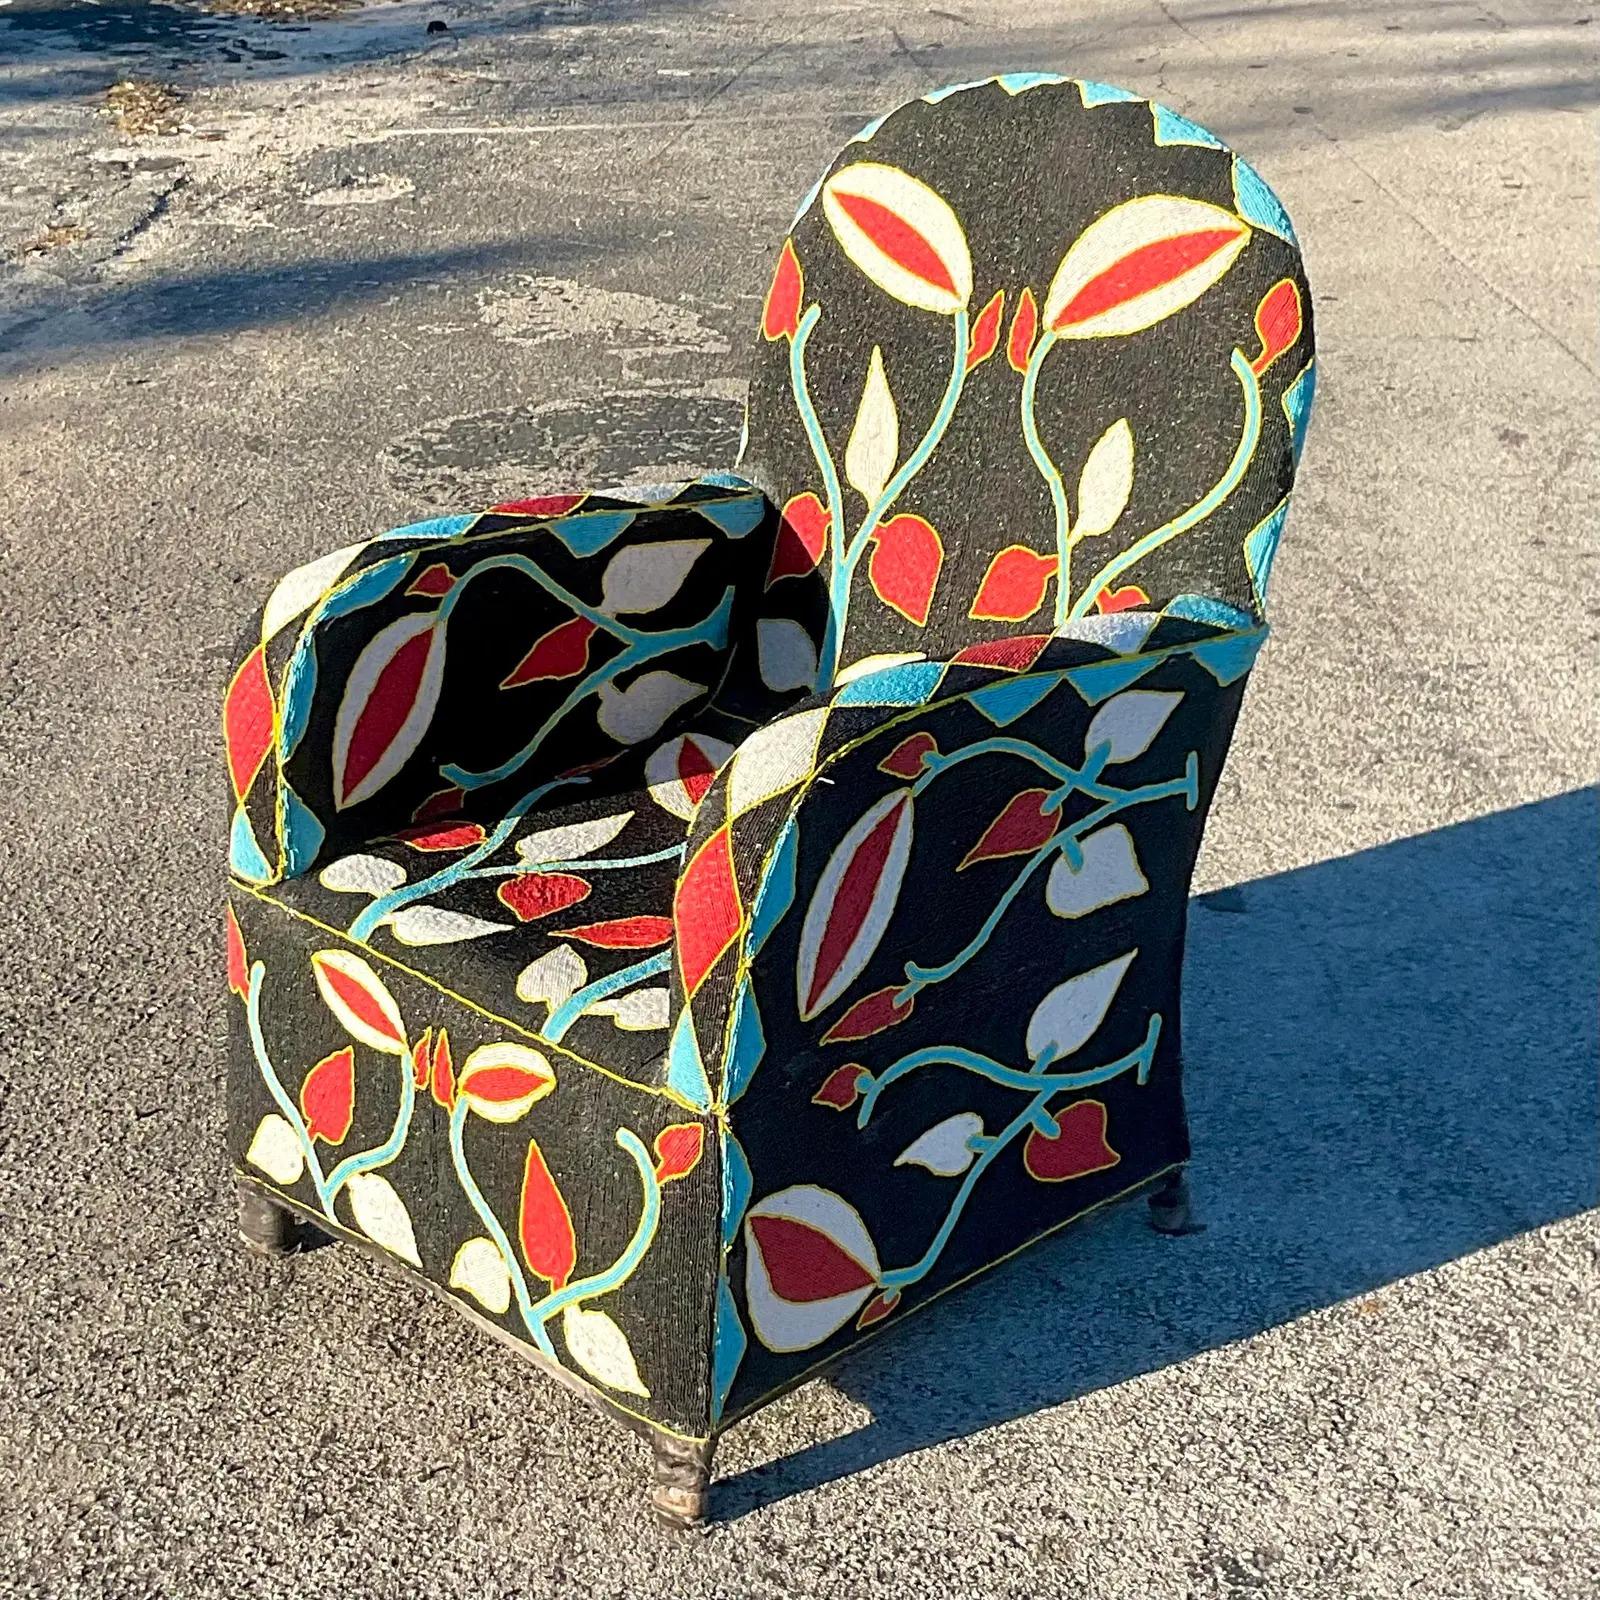 A spectacular vintage Boho arm chair. A chic Yoruba style in a brilliant colorful design. Completely hand beaded with incredible attention to detail. Acquired from a Palm Beach estate.